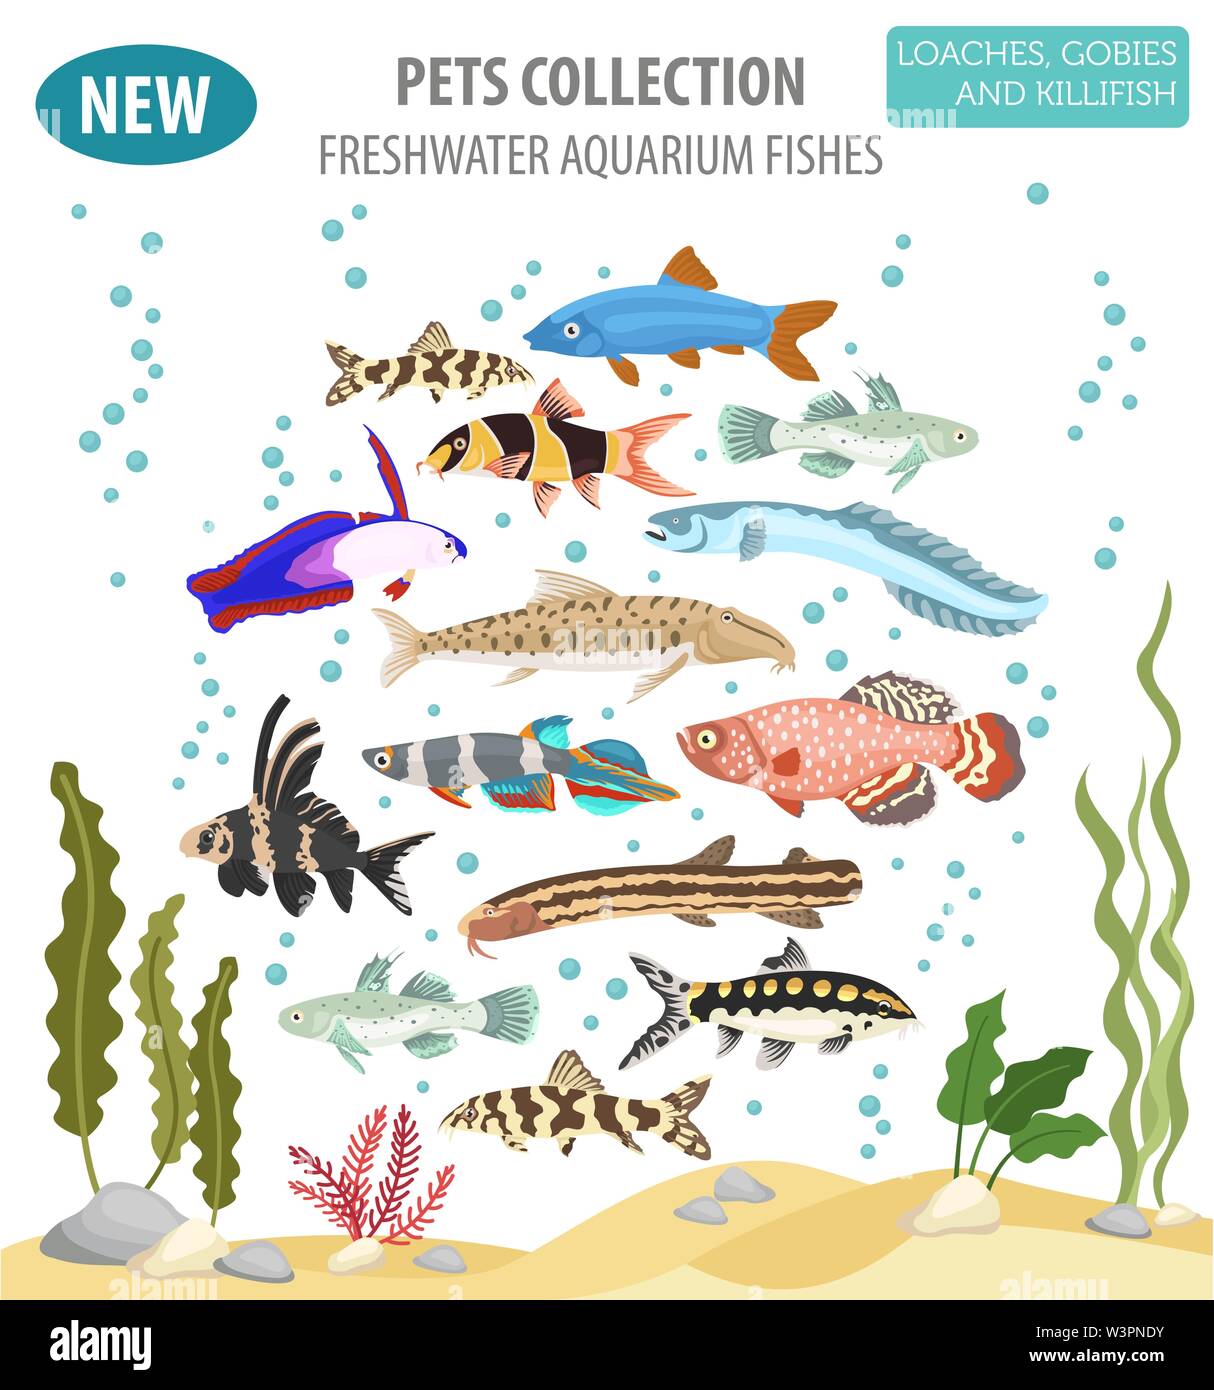 Freshwater aquarium fishes breeds icon set flat style isolated on white. Loaches, gobies, killifishes. Create own infographic about pets. Vector illus Stock Vector